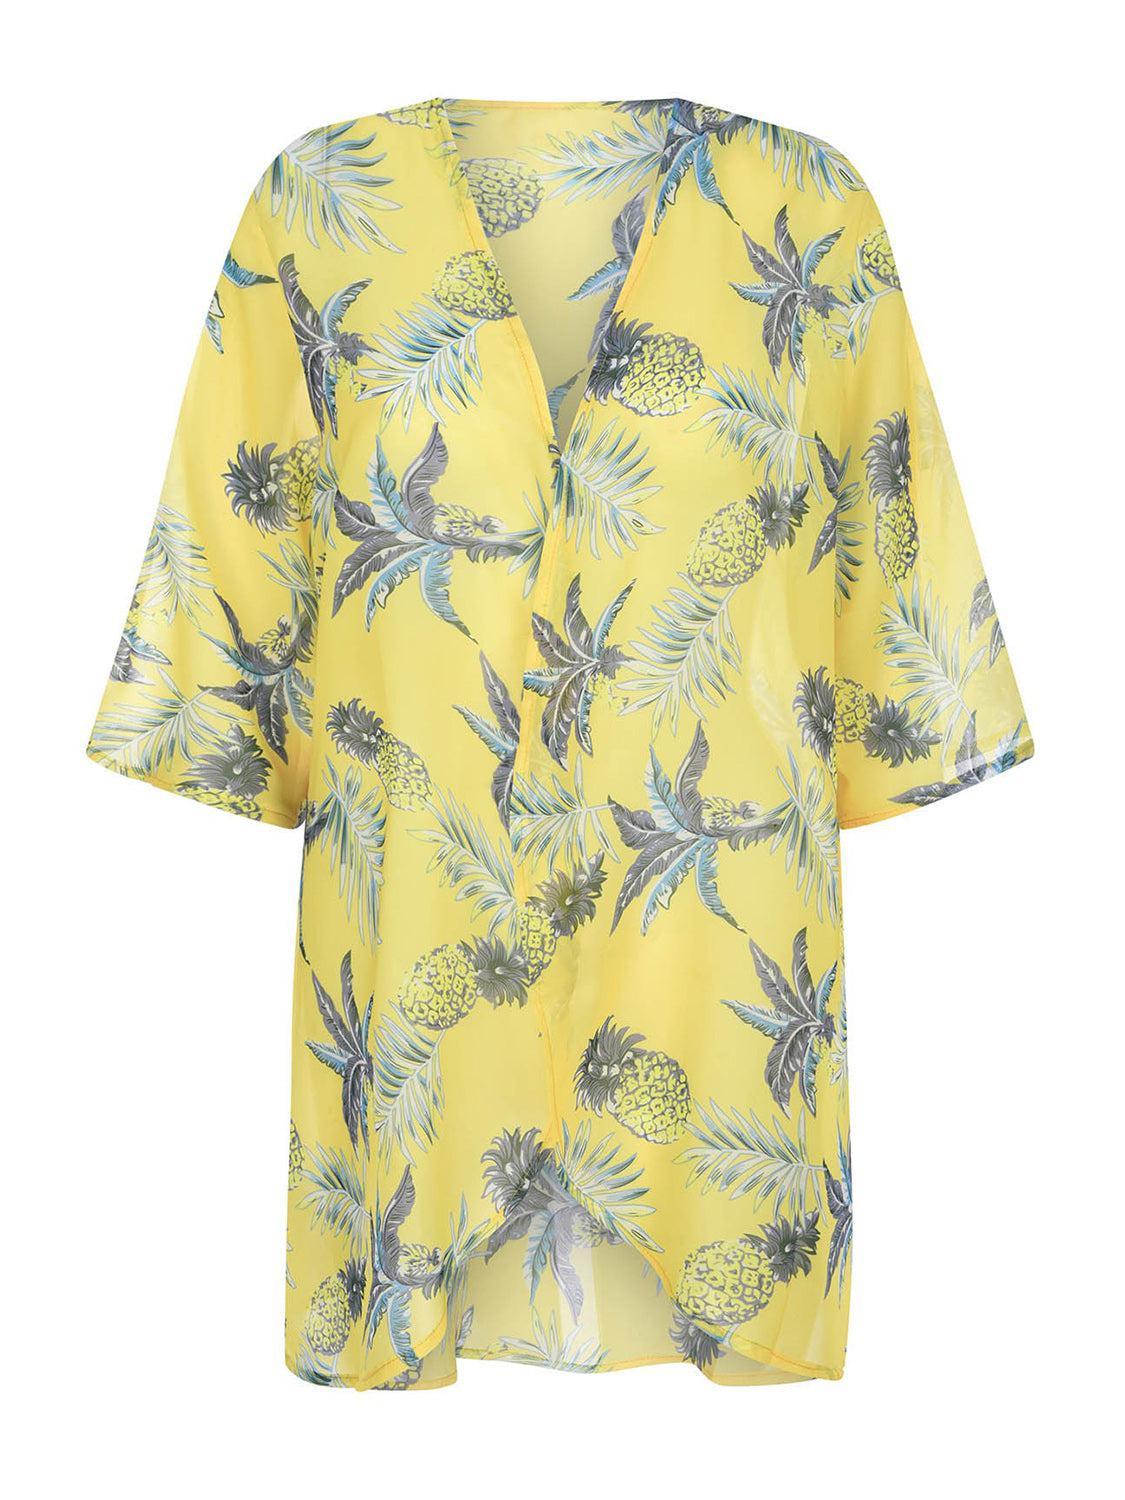 a yellow top with pineapples on it